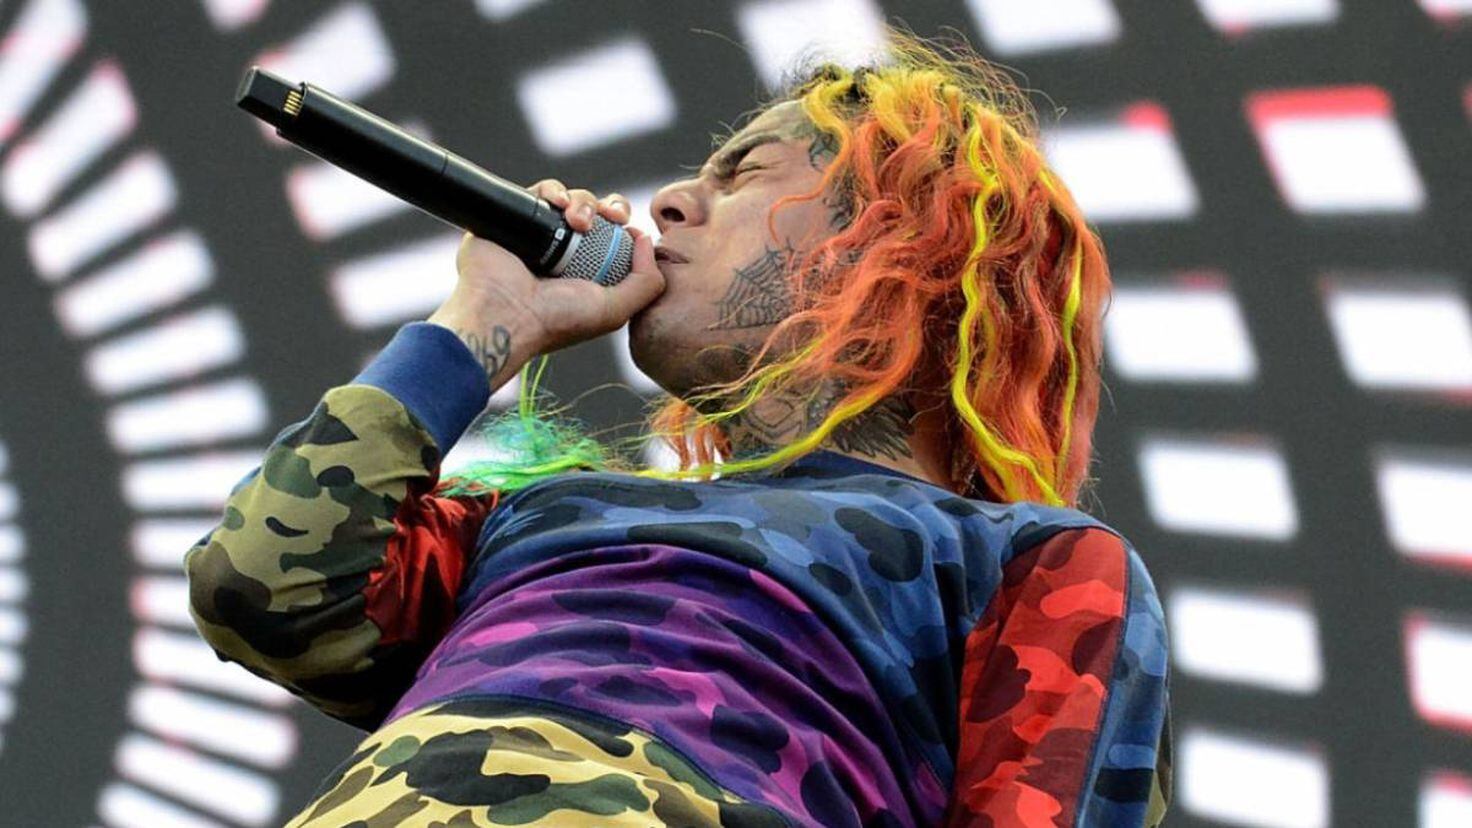 They reveal what Tekashi 6ix9ine’s life was like in prison